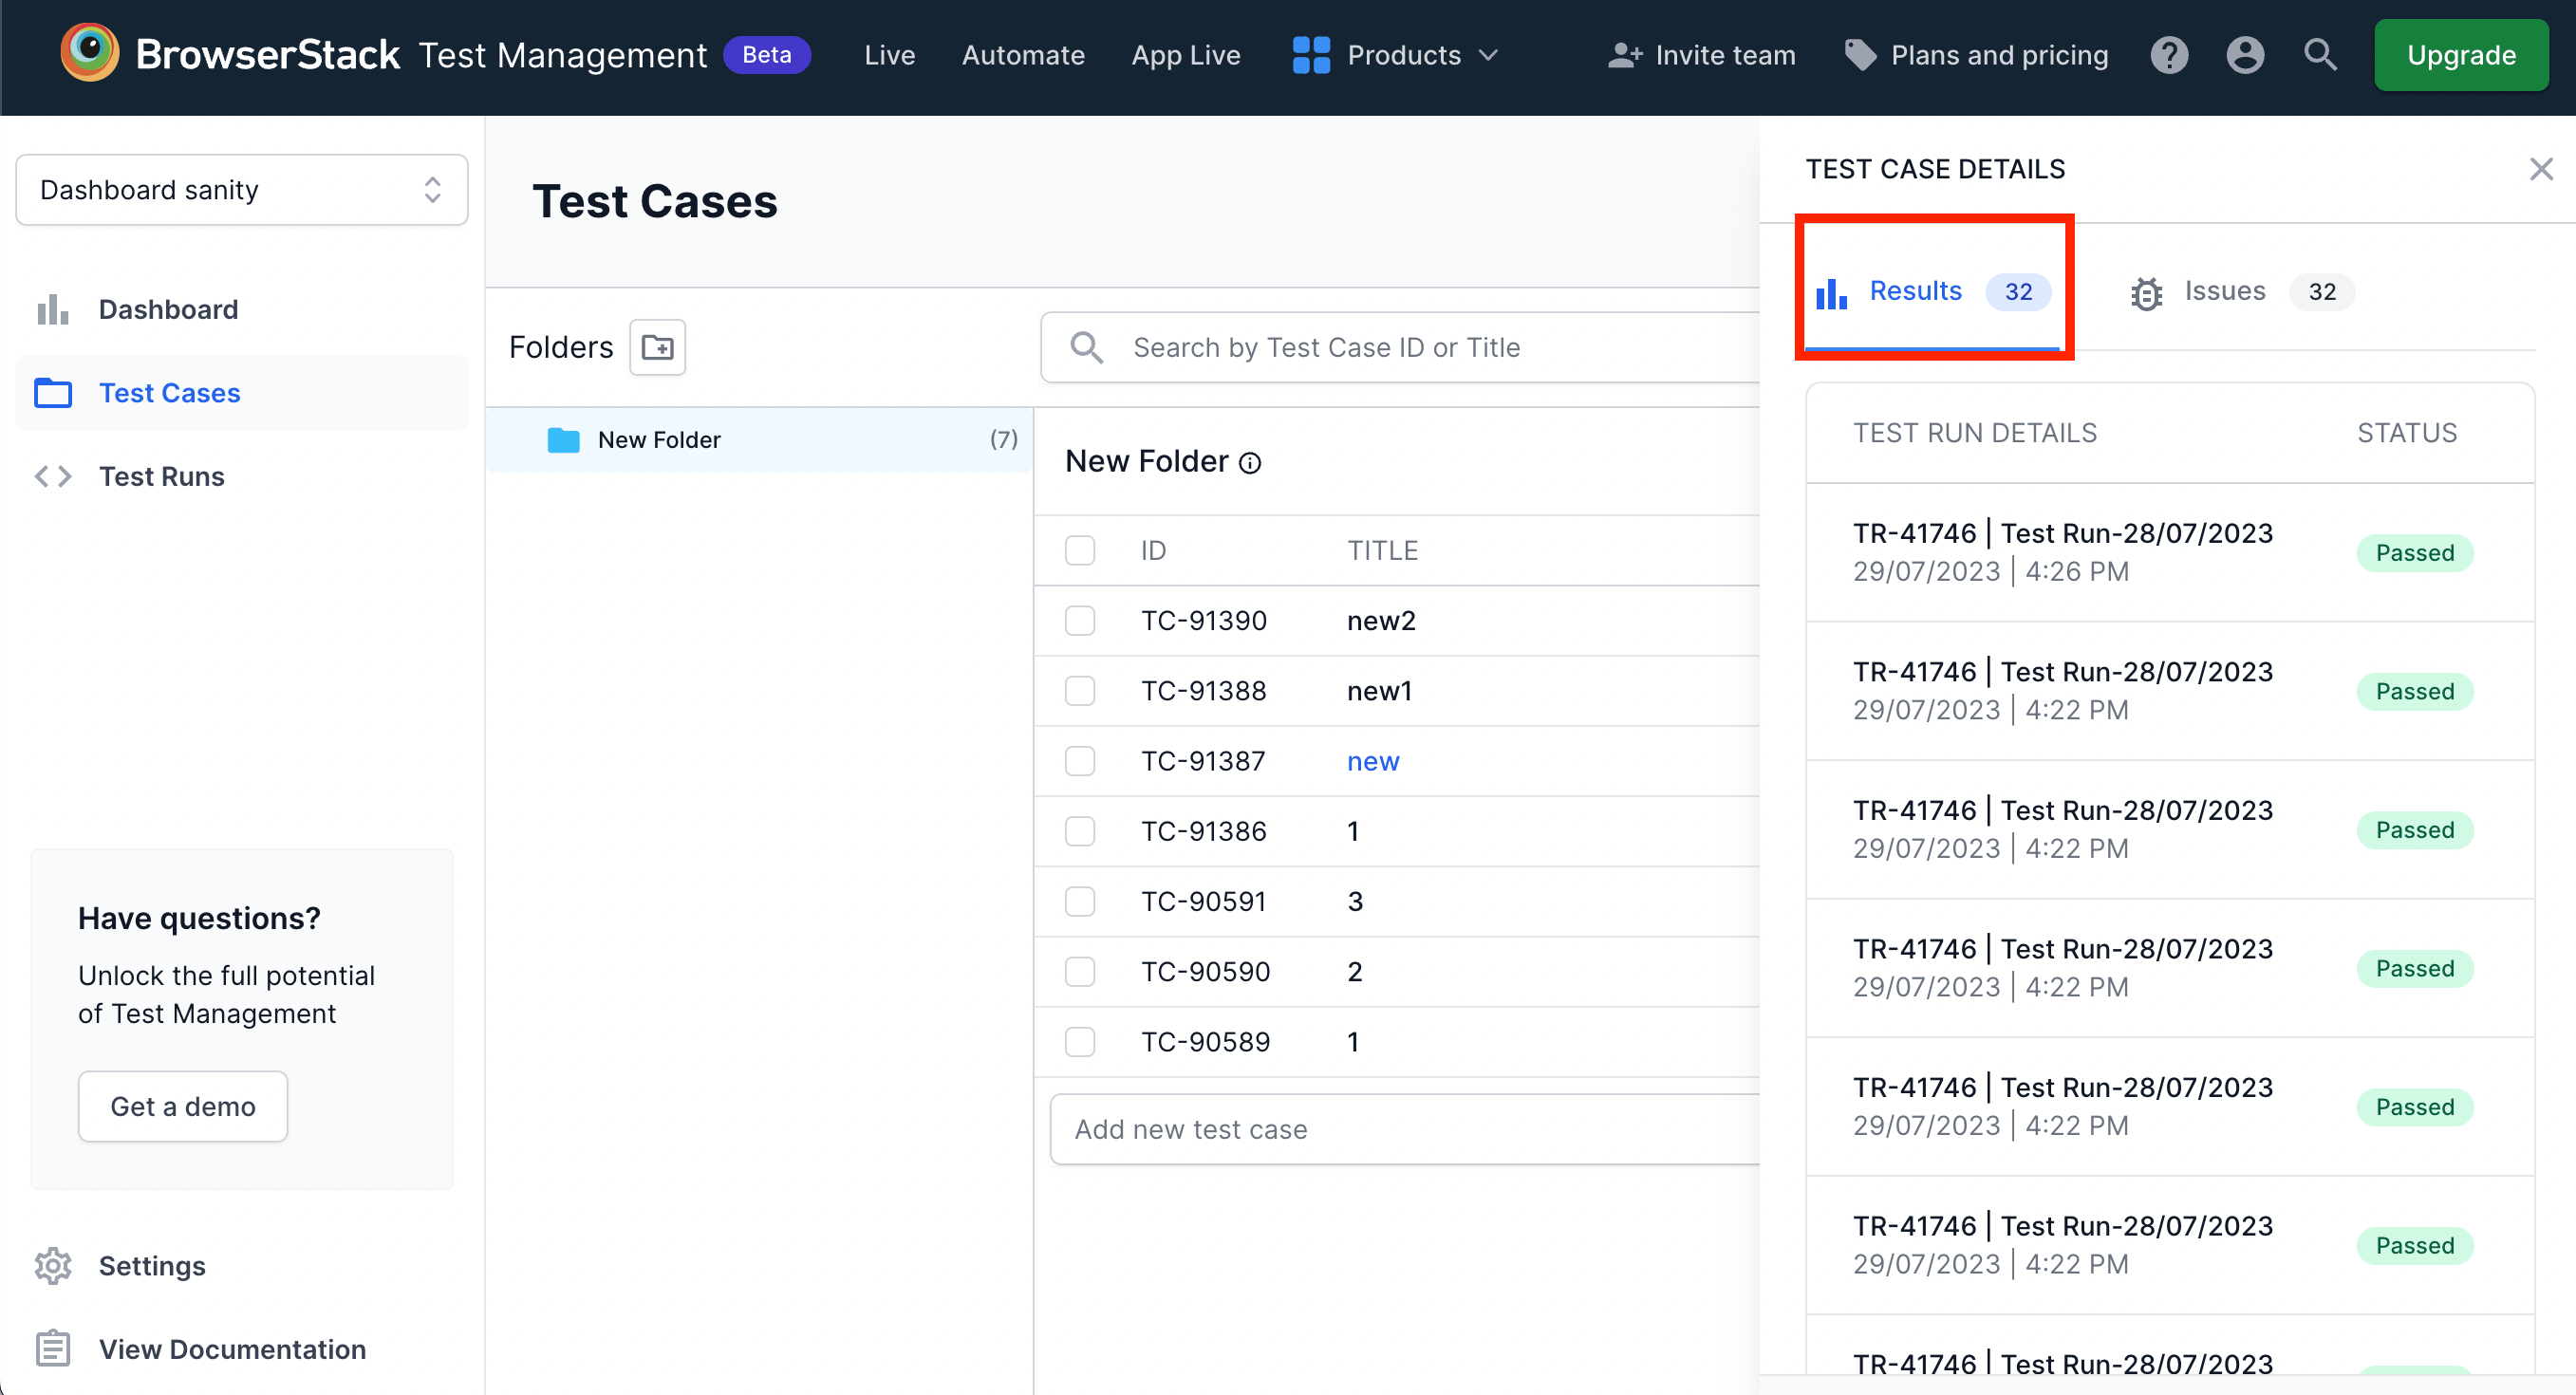 Results tab in the test case detail view